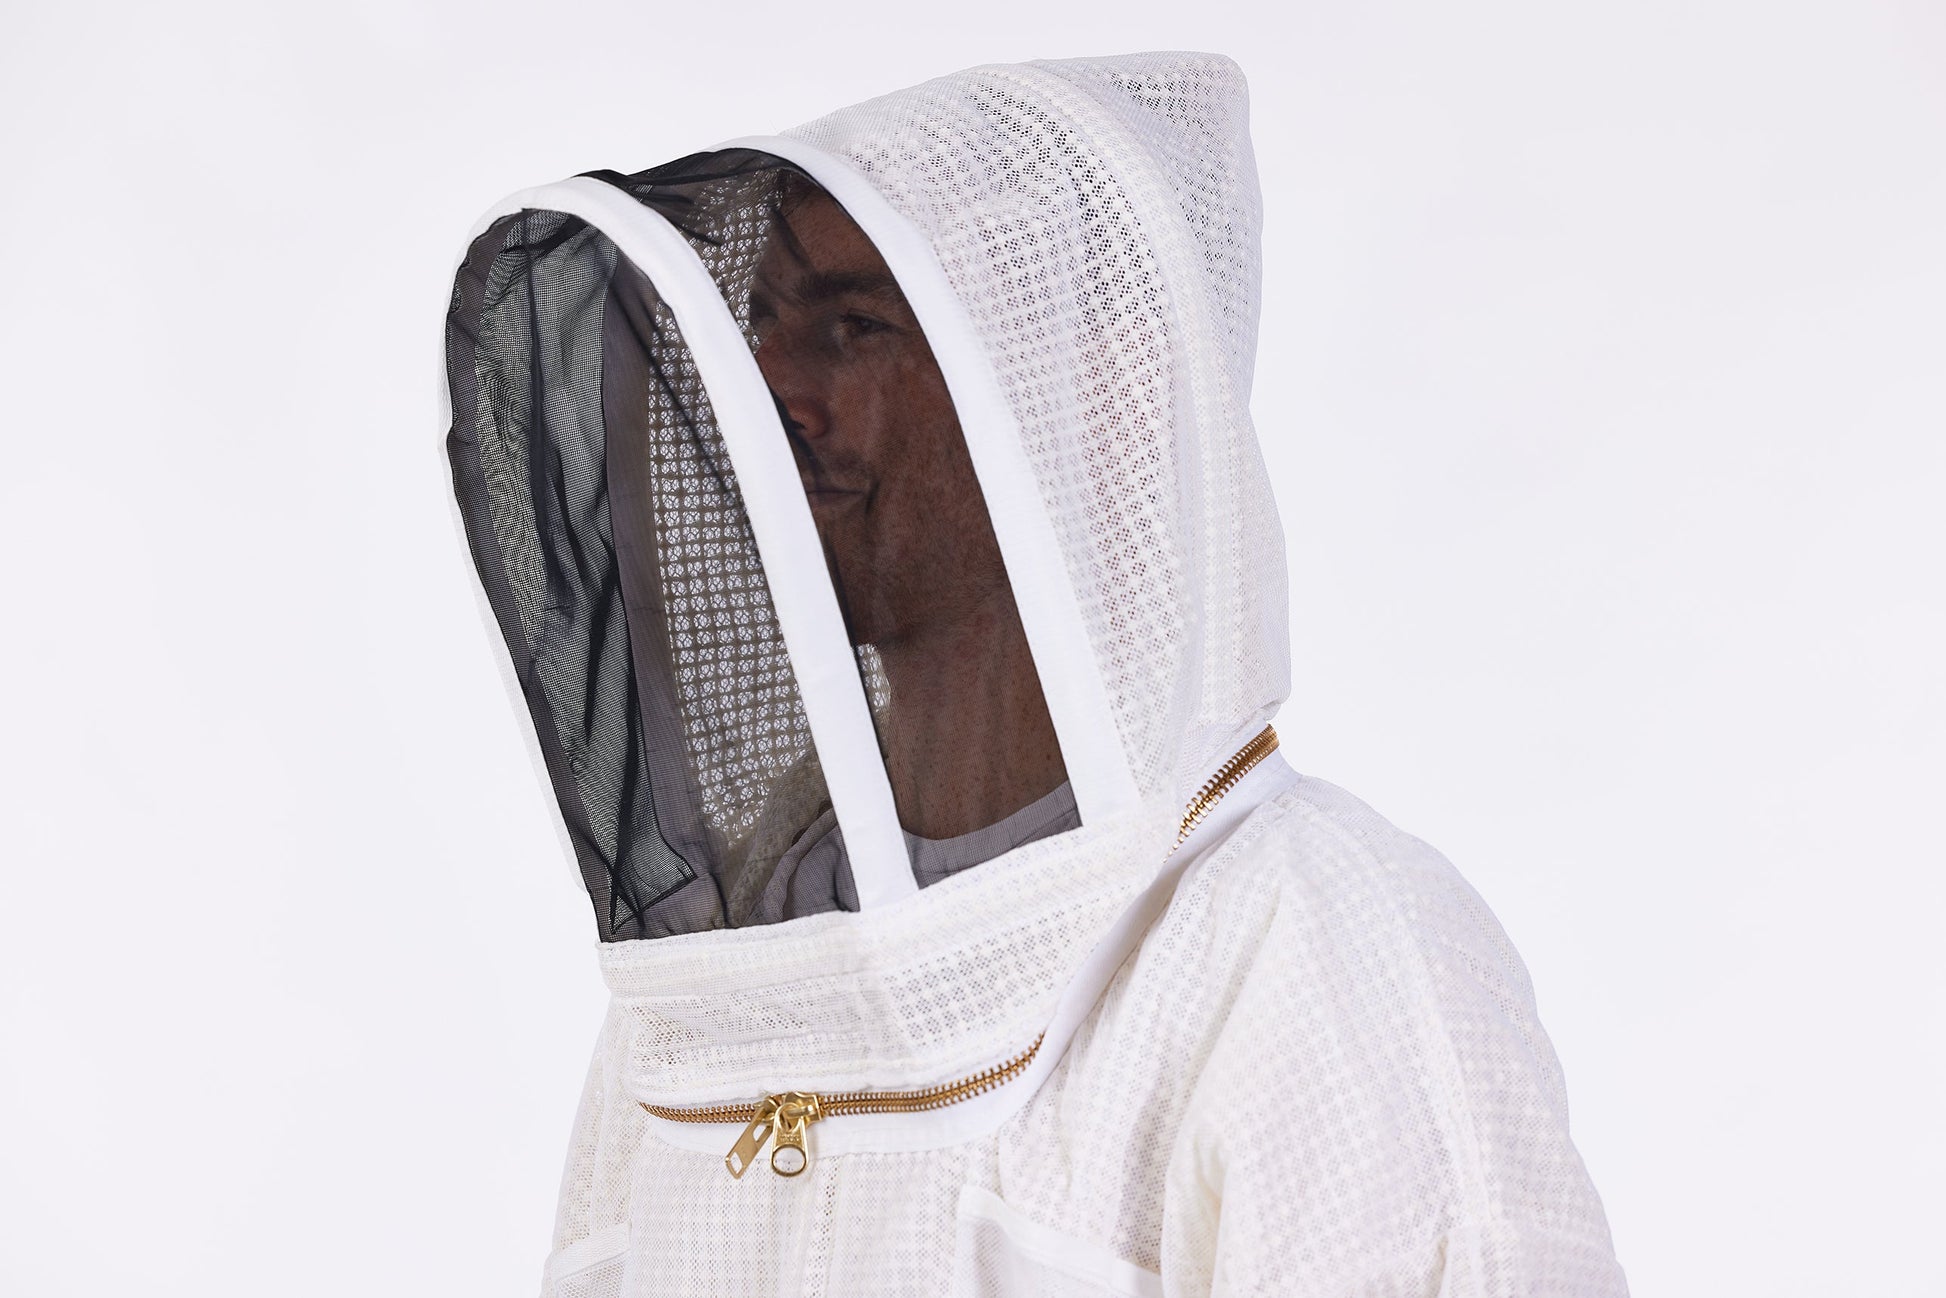 Why You Need the Ultra Breeze Beekeeping Suit For Your Next